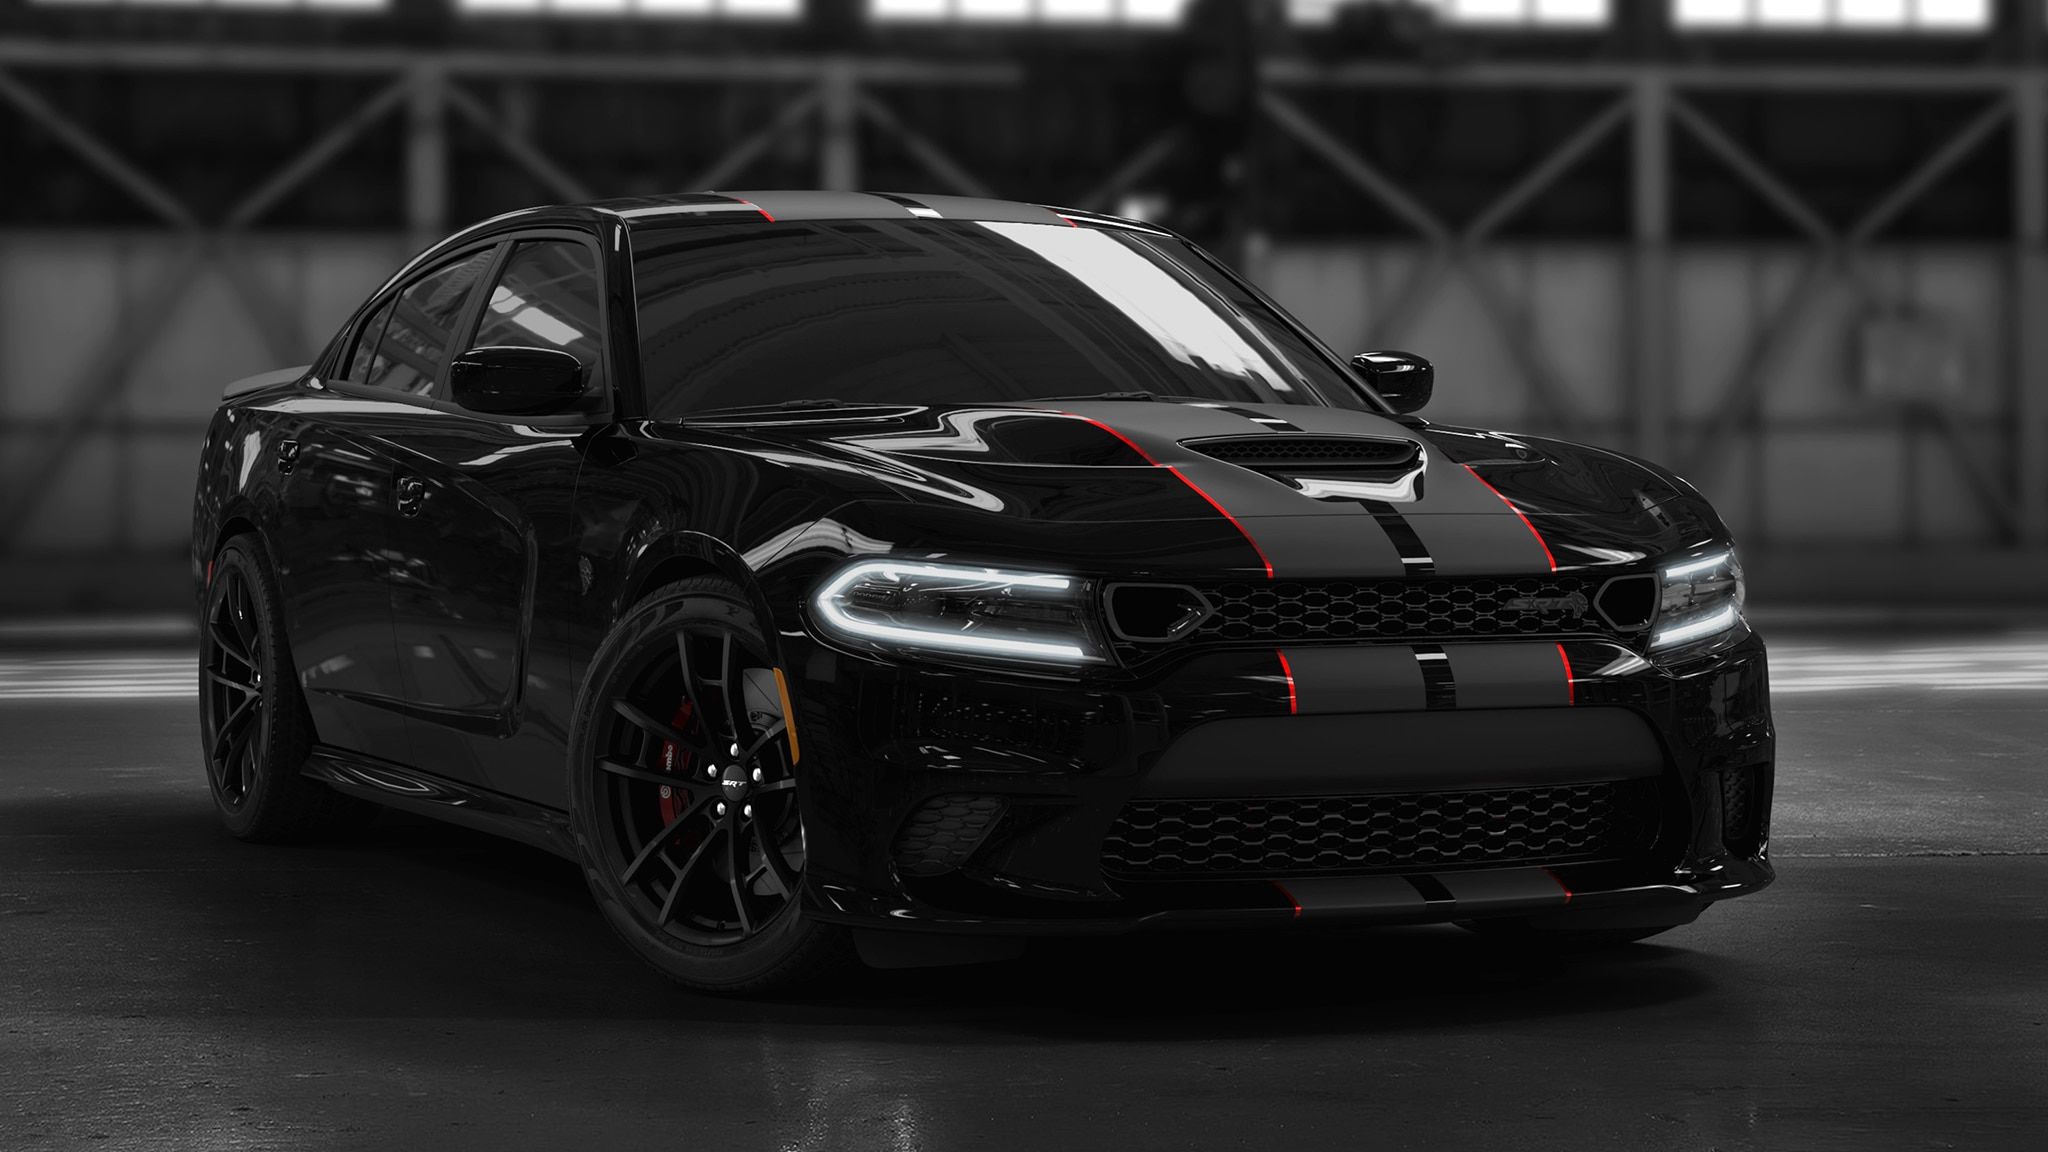 Black Dodge Charger Wallpapers - Wallpaper Cave